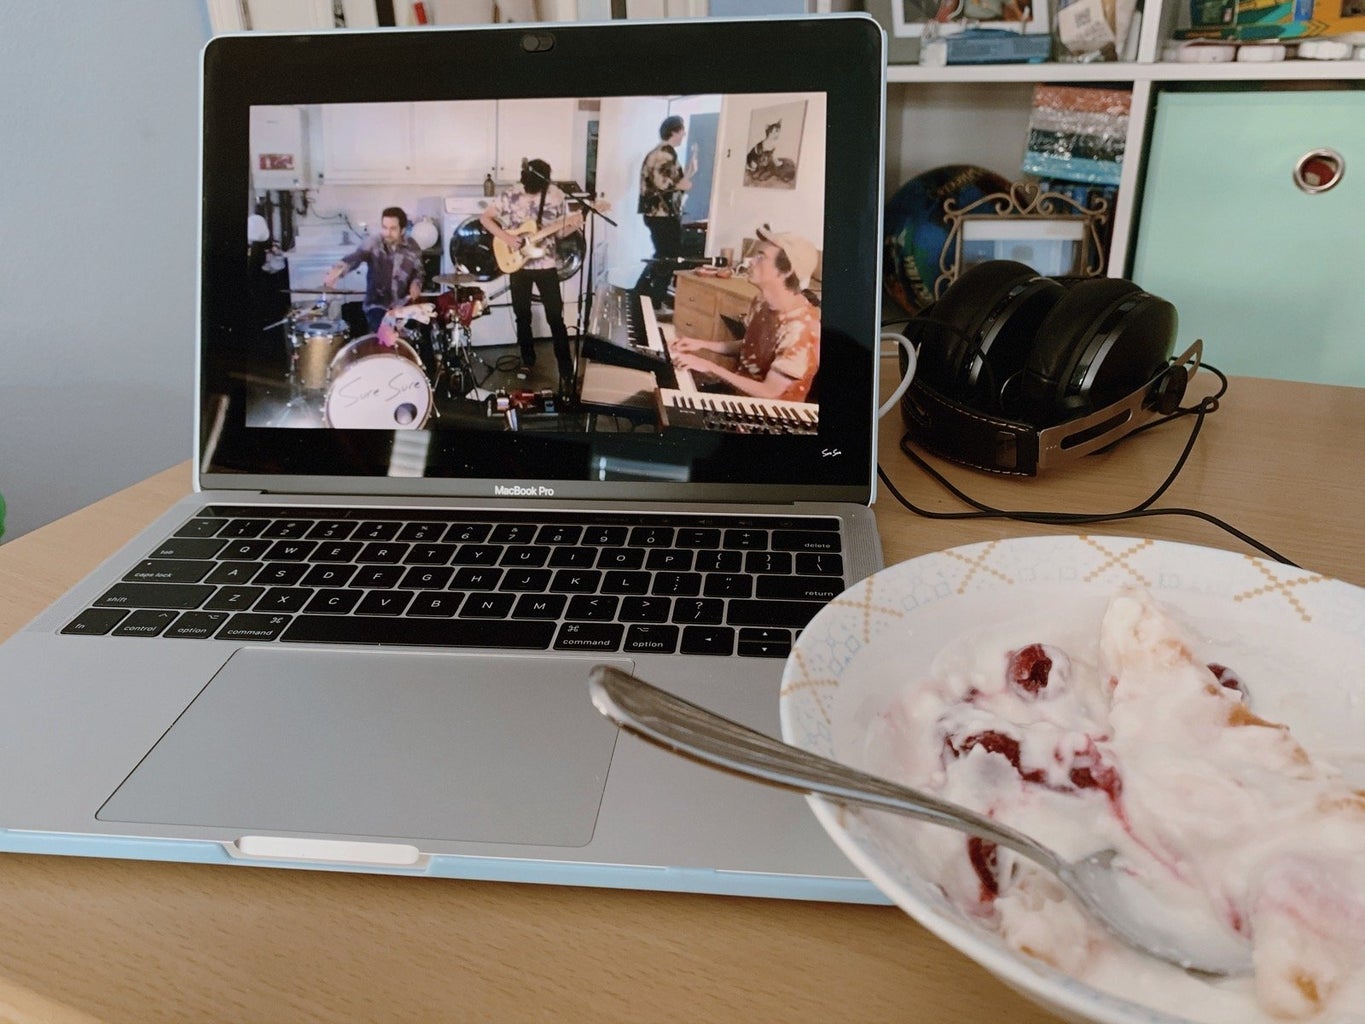 concert being streamed on a computer with a bowl of yogurt on the side